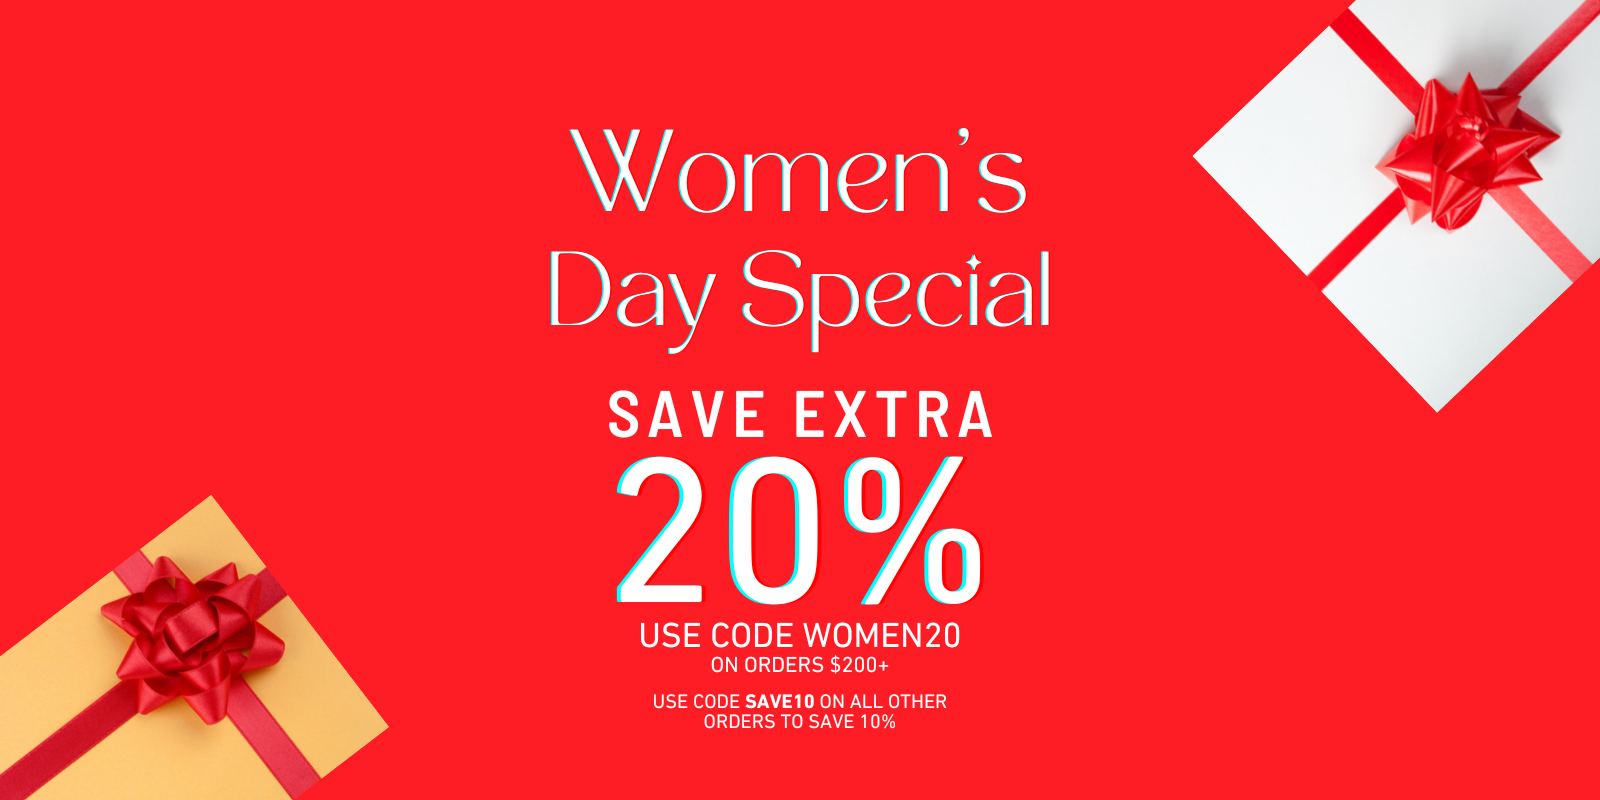 WOMEN'S DAY SPECIAL SAVE EXTRA 20% OFF USE CODE WOMEN20 ON ORDERS $200+, USE CODE SAVE10 ON ALL OTHER ORDERS TO SAVE 10%